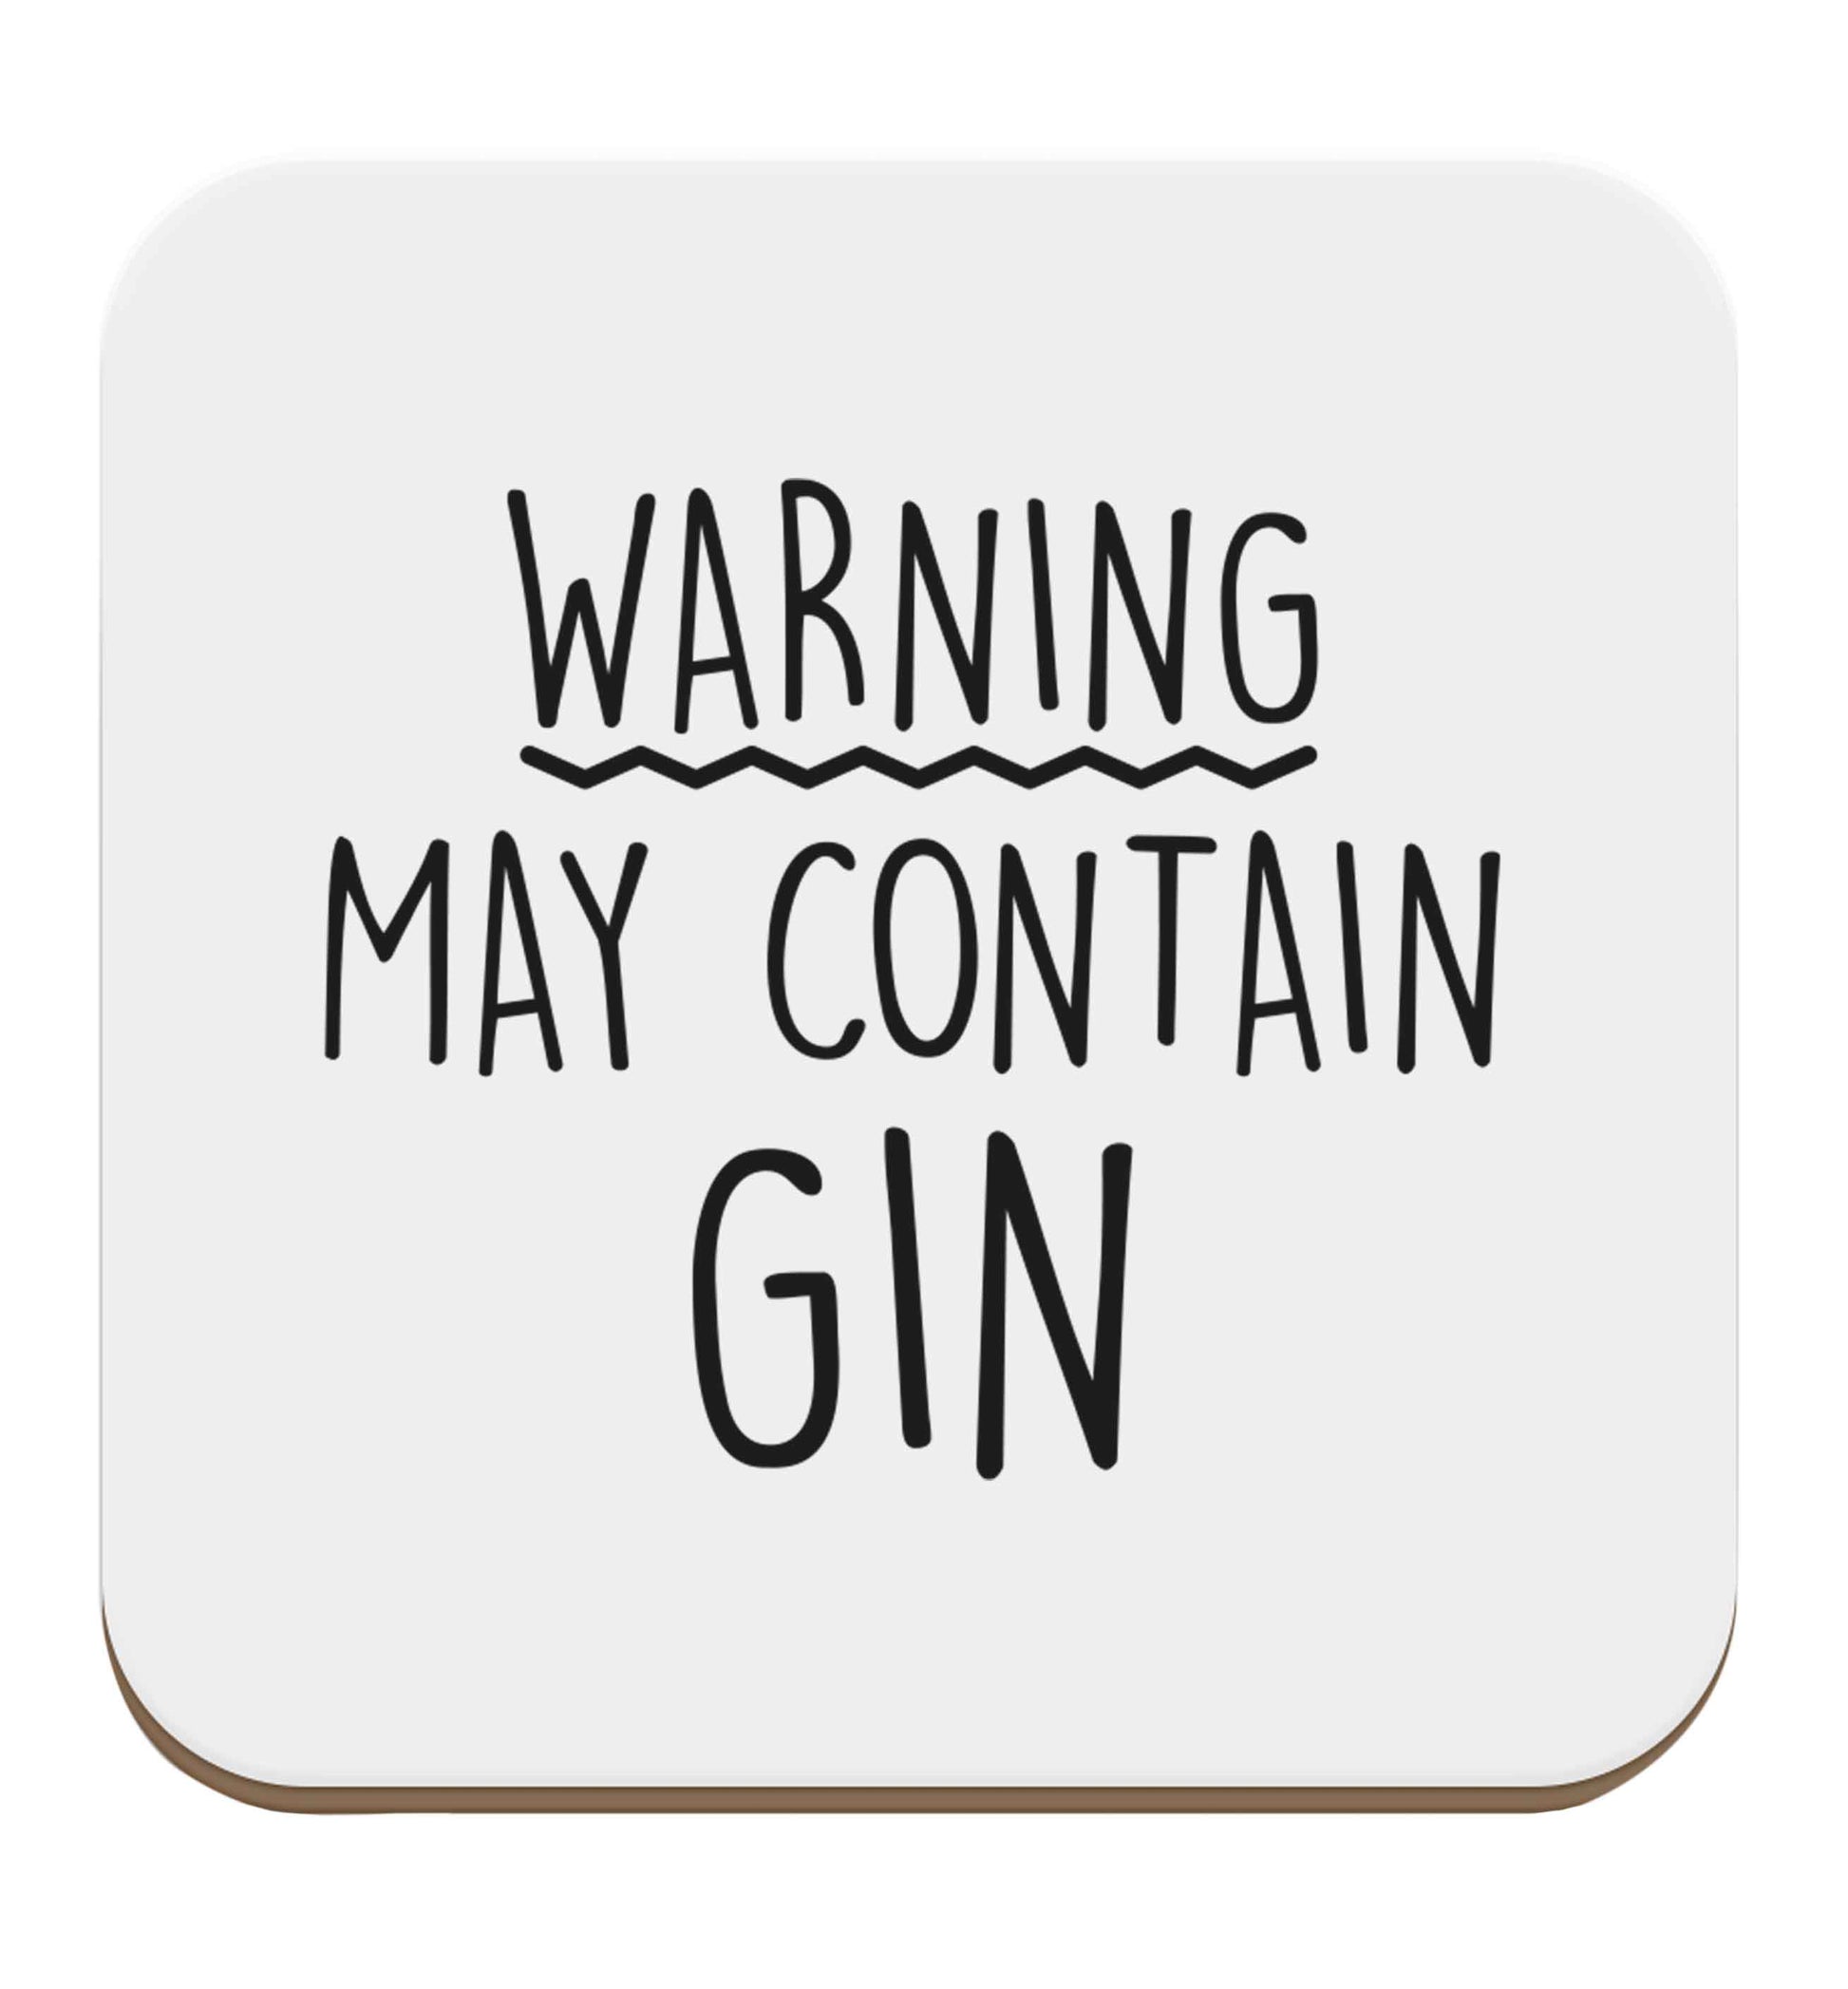 Warning may contain gin set of four coasters